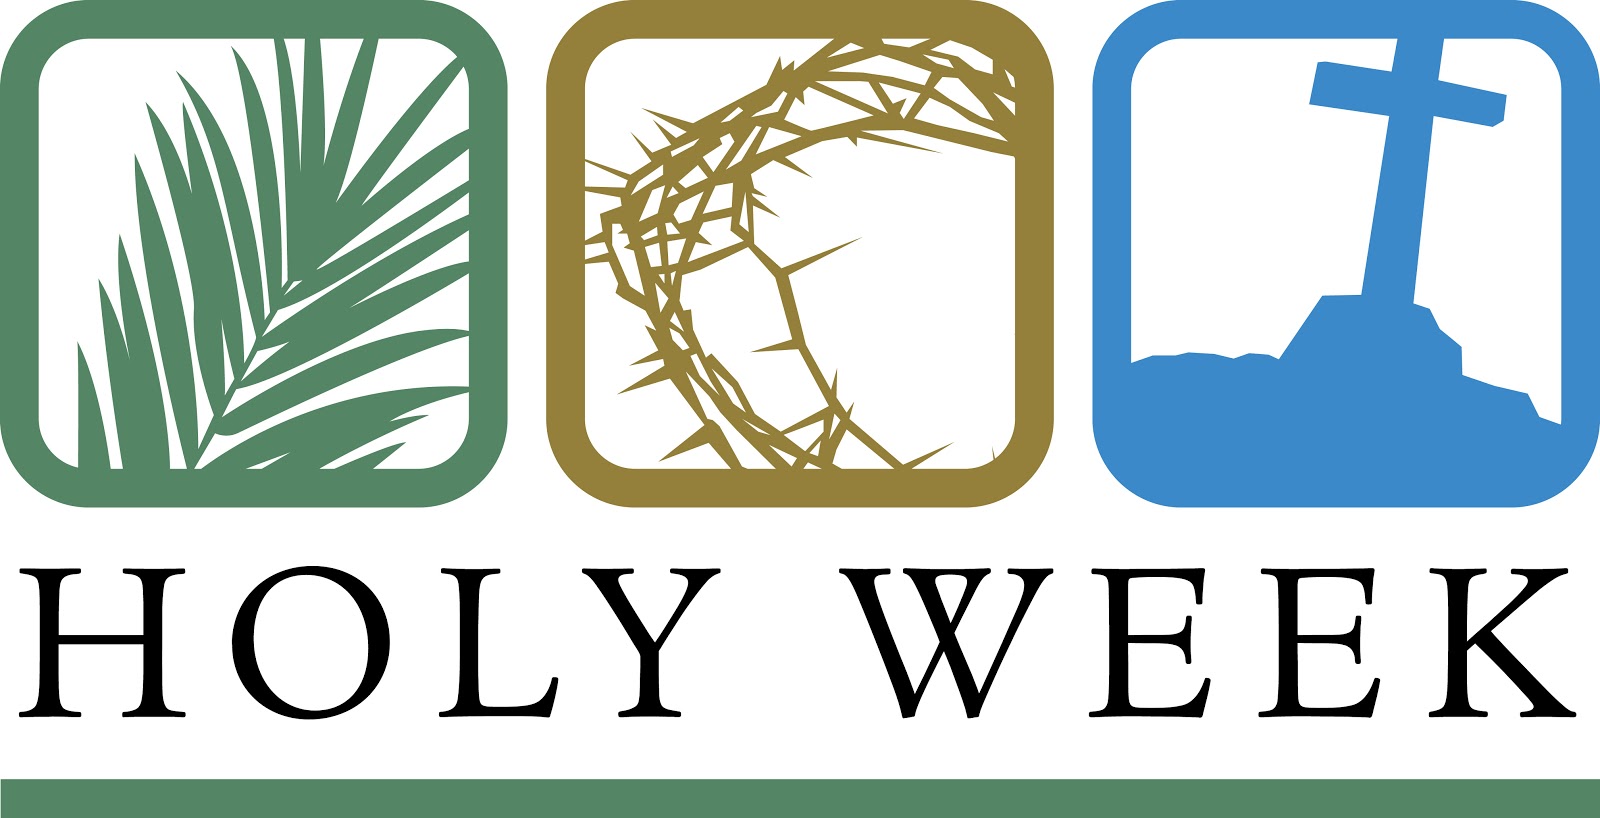 WEDNESDAY CHURCH ON THE Holy Week Jesus talked the talk and